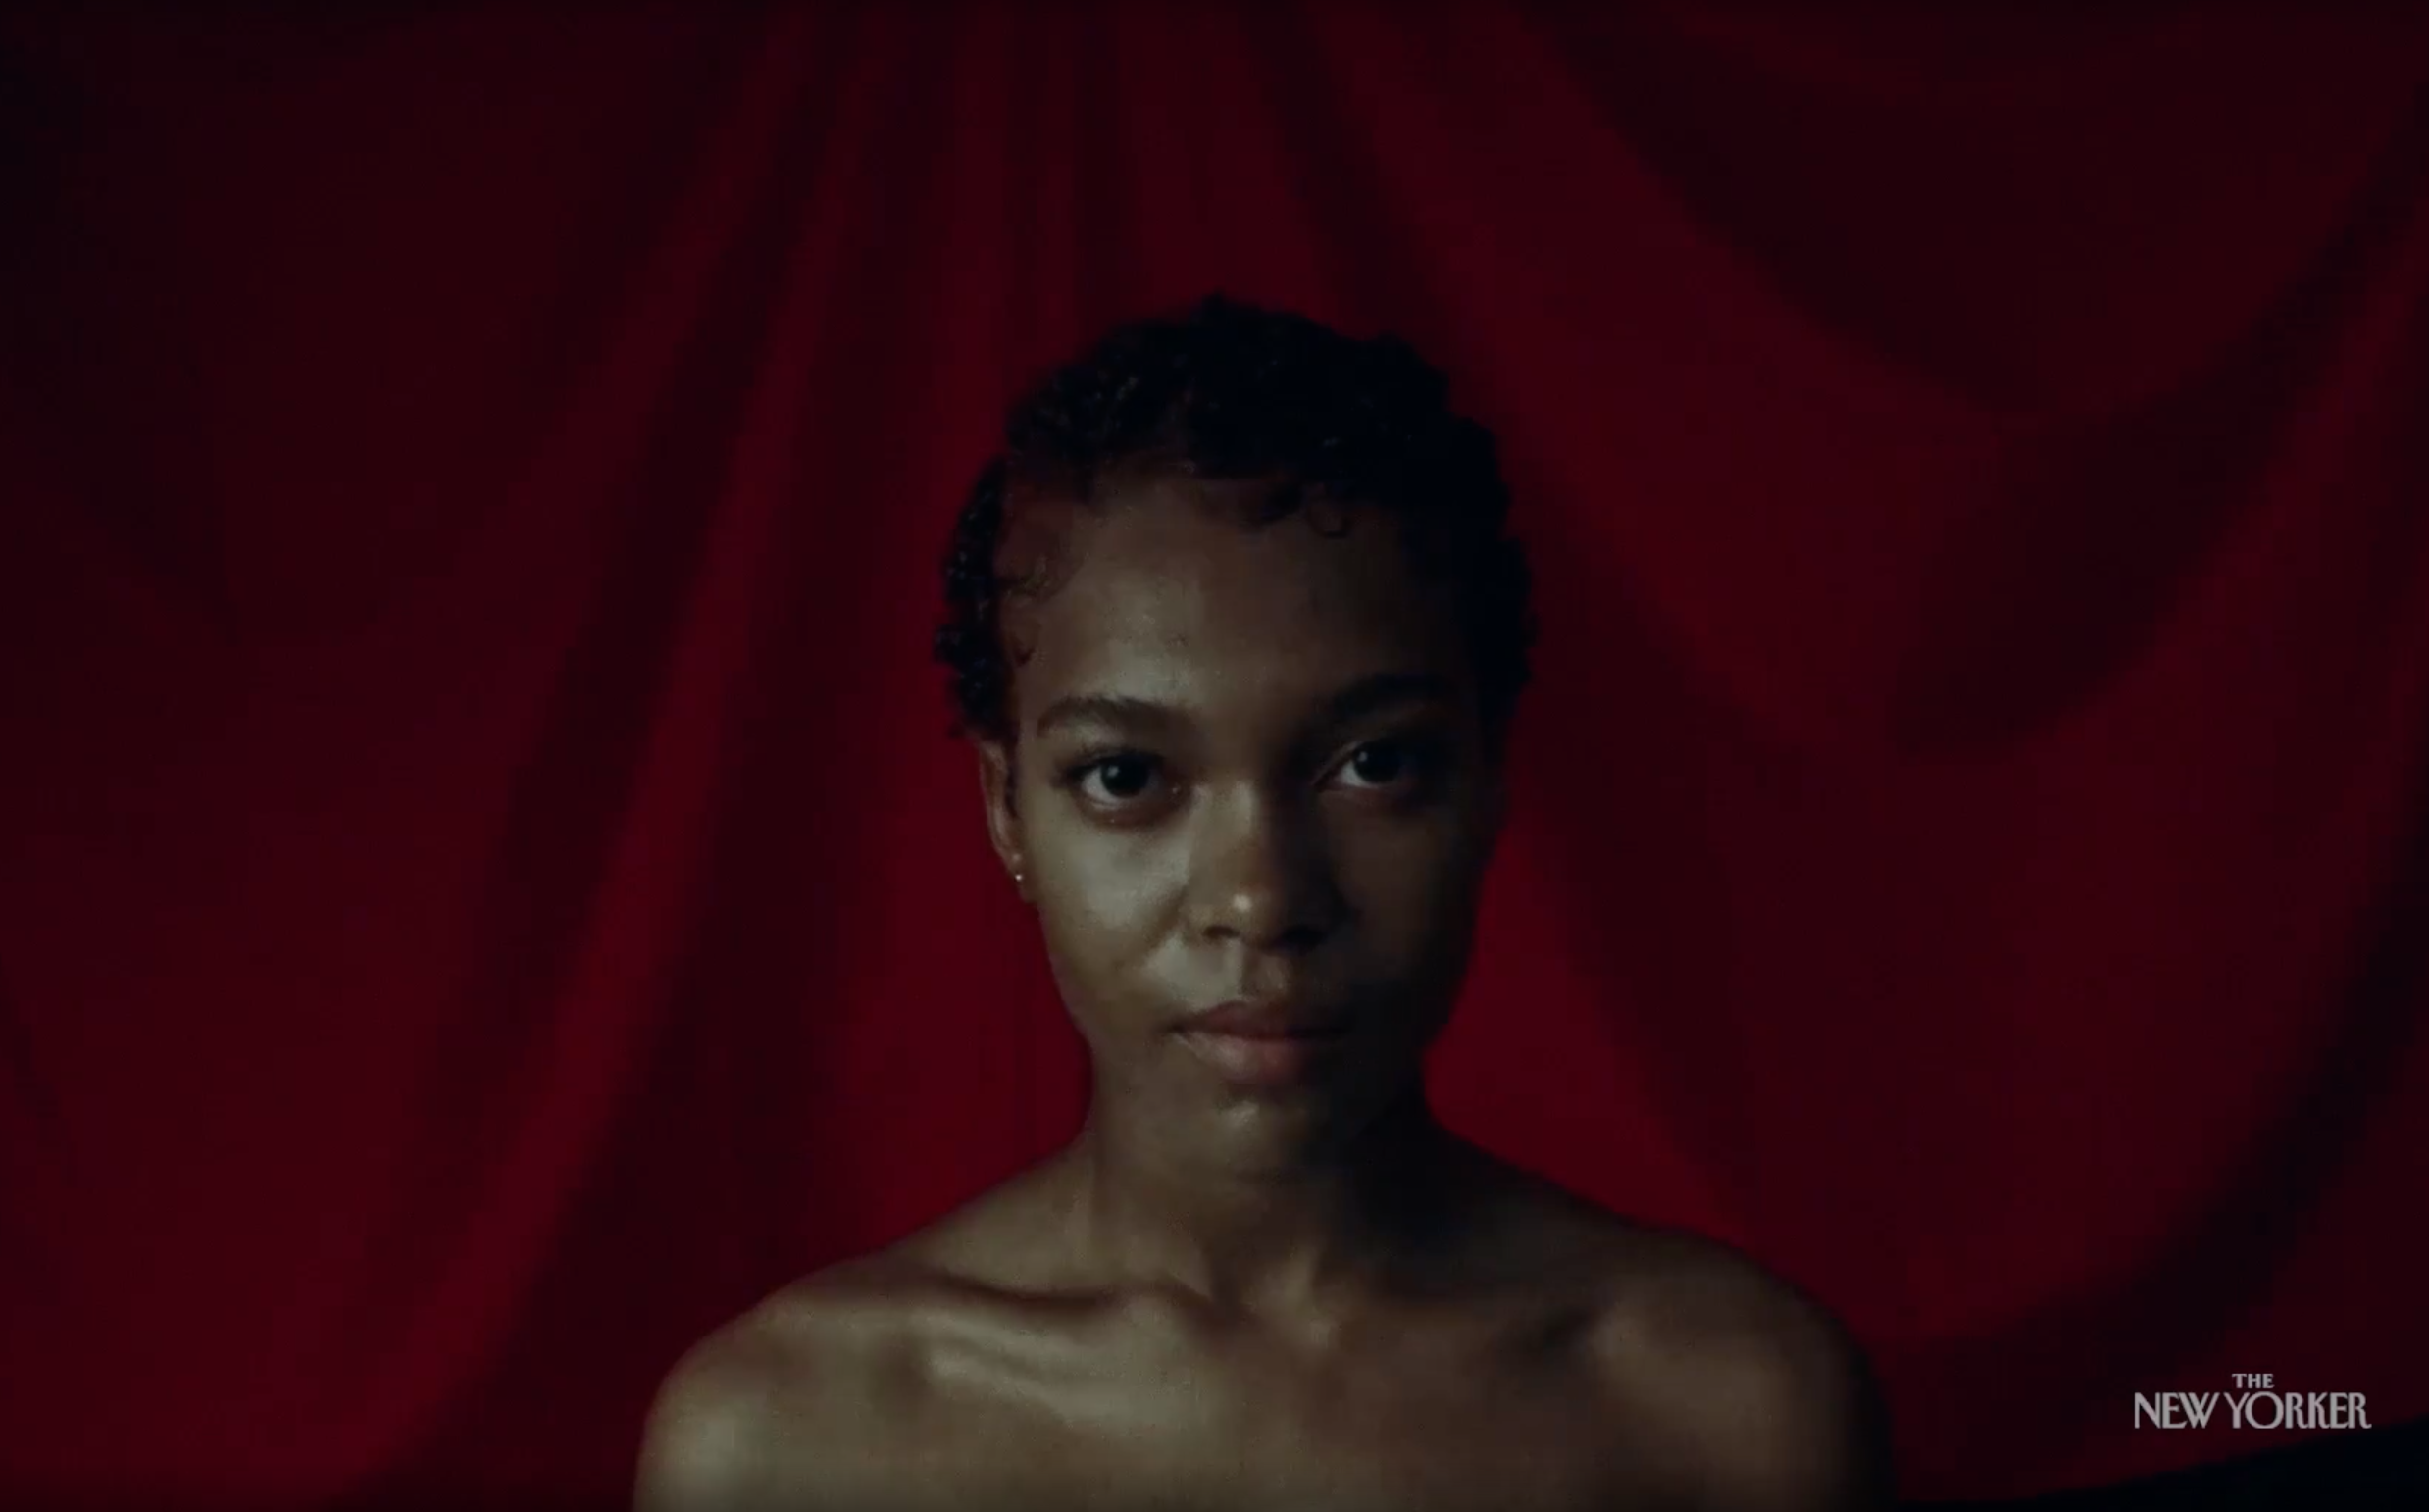 A Black woman with short curly hair stands in front of a red background, bare-shouldered and staring at the camera. From Juliana Kasumu’s 'Baby Bangz: Black Power in Hair,' now streaming on New Yorker.com.